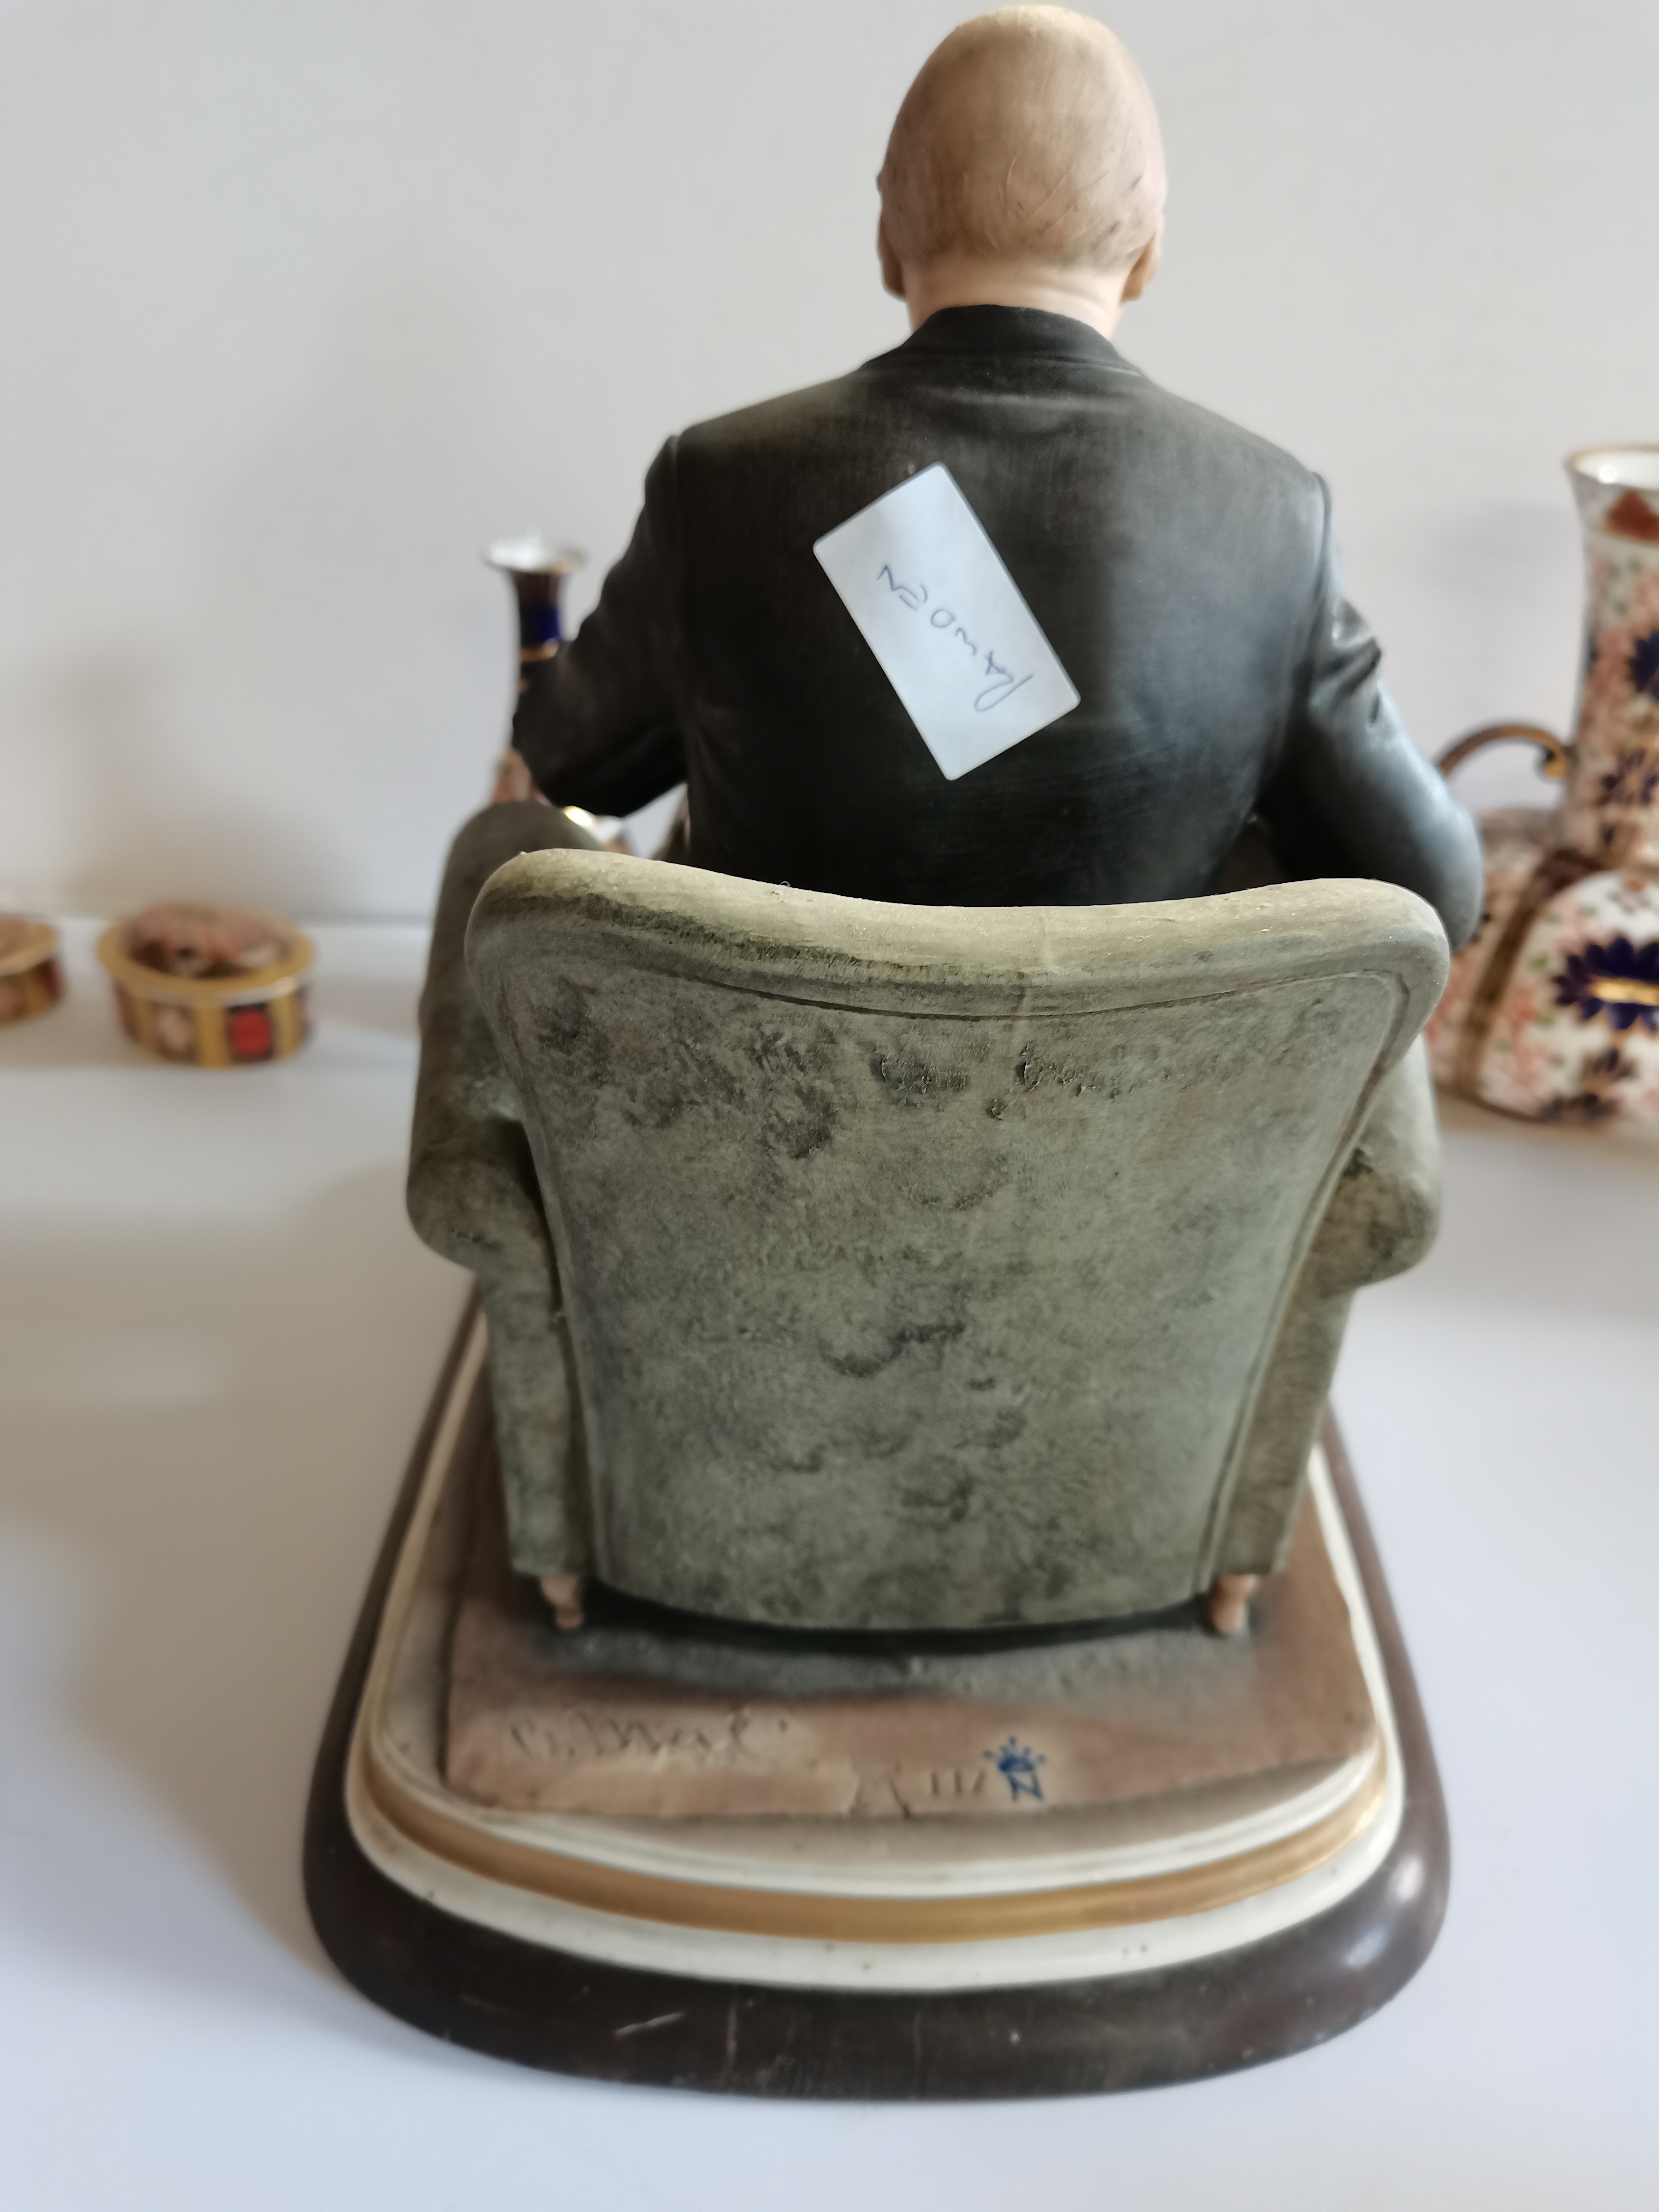 Capodemonte Winston Churchill Pot Figure on a stand ( ex. Condition ) - Image 3 of 6